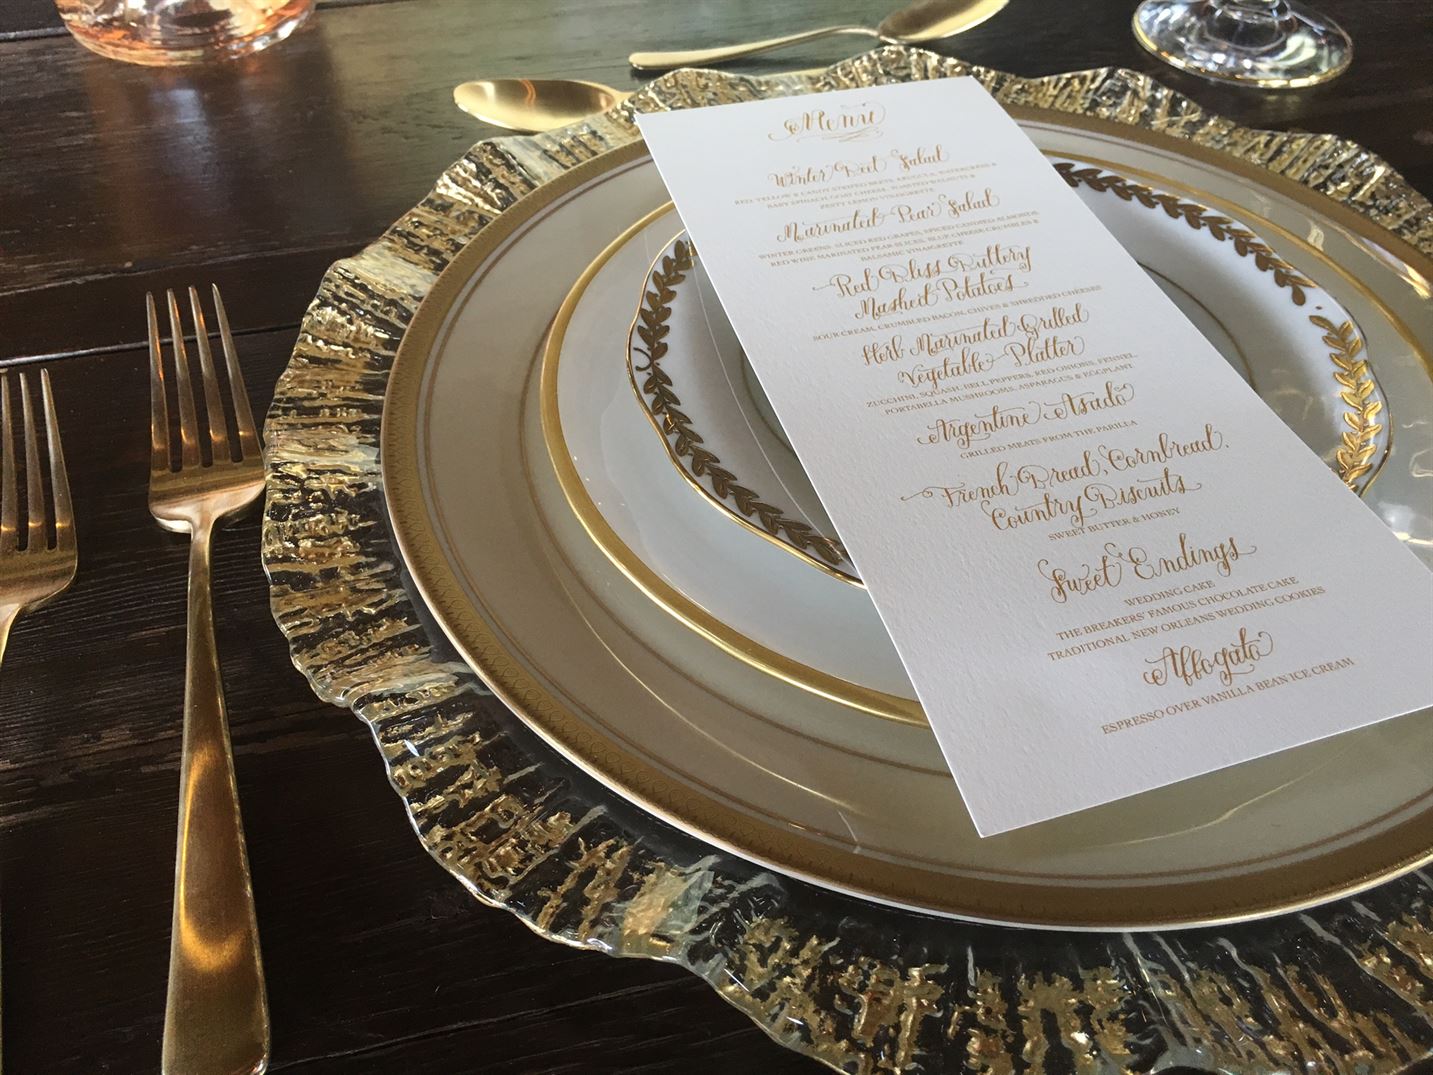 Mix and Match Formal and Casual China Patterns for the Perfect Head Table: Vietri Rufolo Gold Charger with Pickard Dinner Plate. Menu by Red Bird Paper Company Birmingham, AL